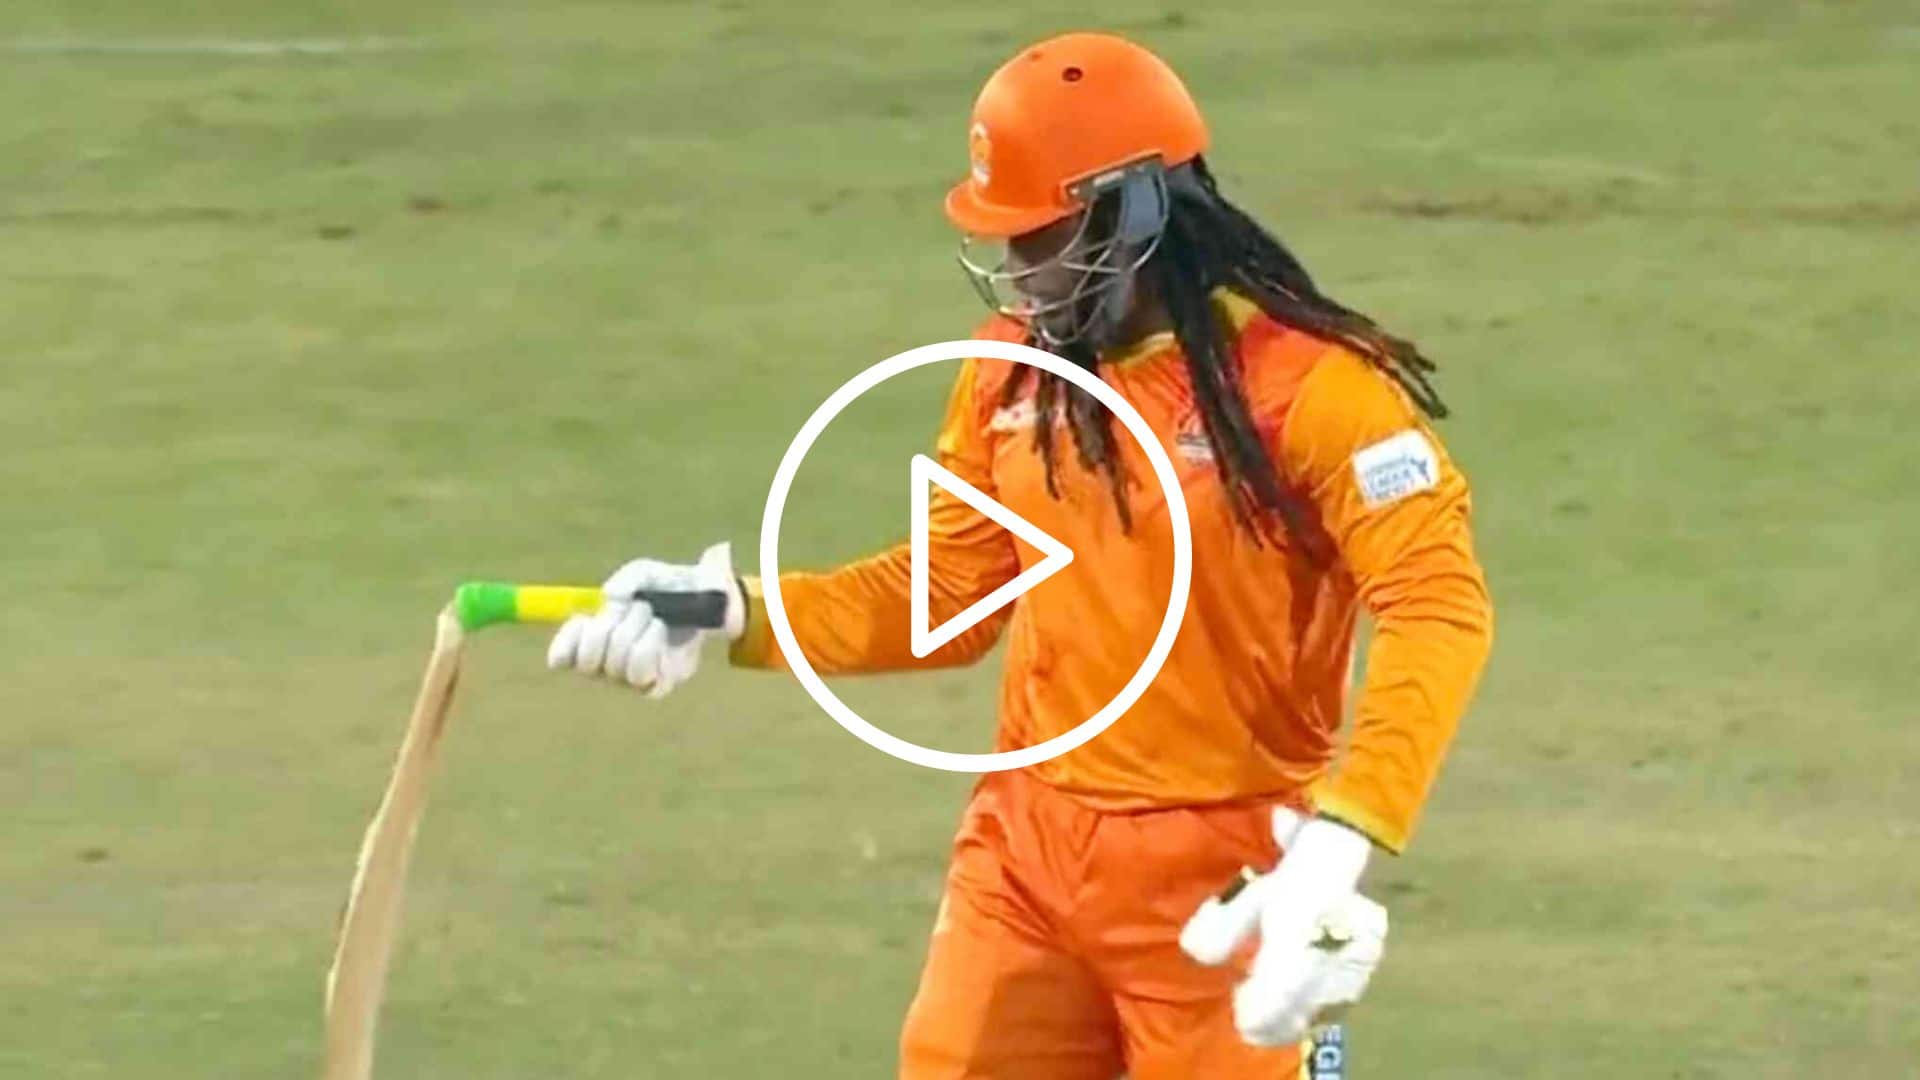 [Watch] The Universe Boss Chris Gayle Stuns Everyone With A Bat-Breaking Boundary 